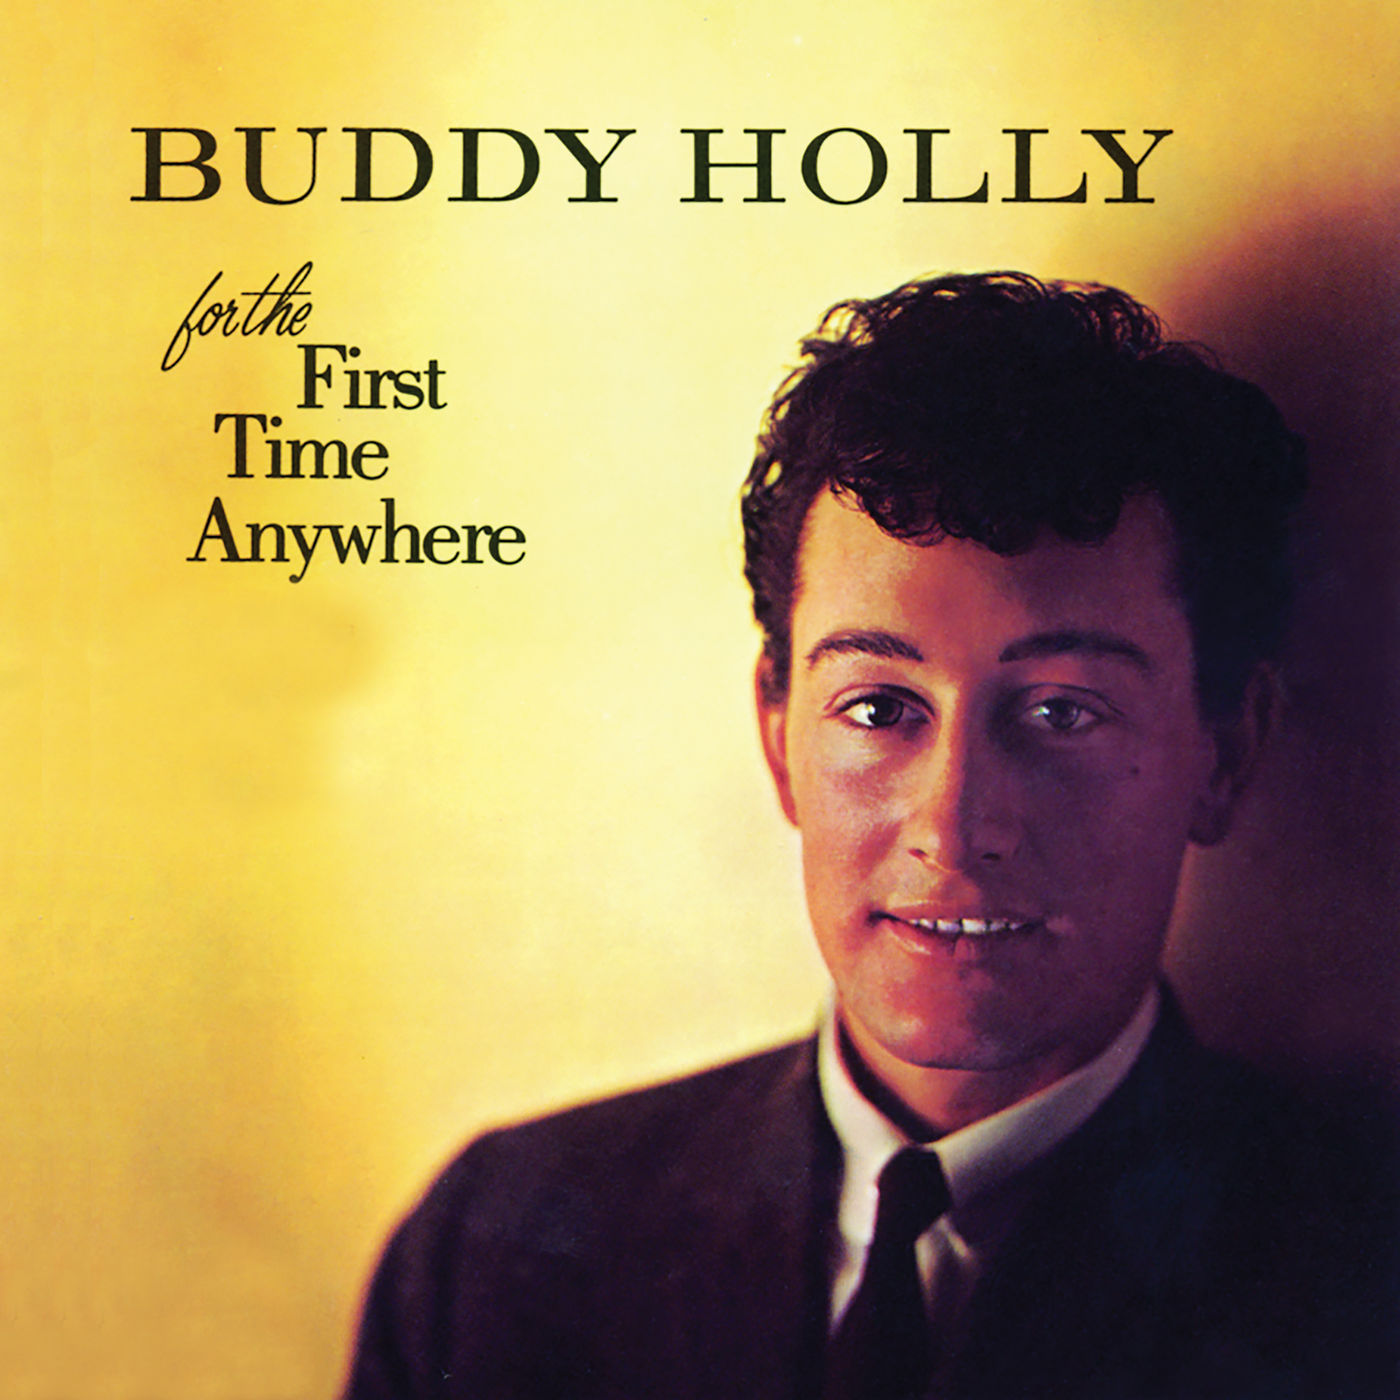 Buddy Holly - For The First Time Anywhere (1983/2021) [FLAC 24bit/192kHz]